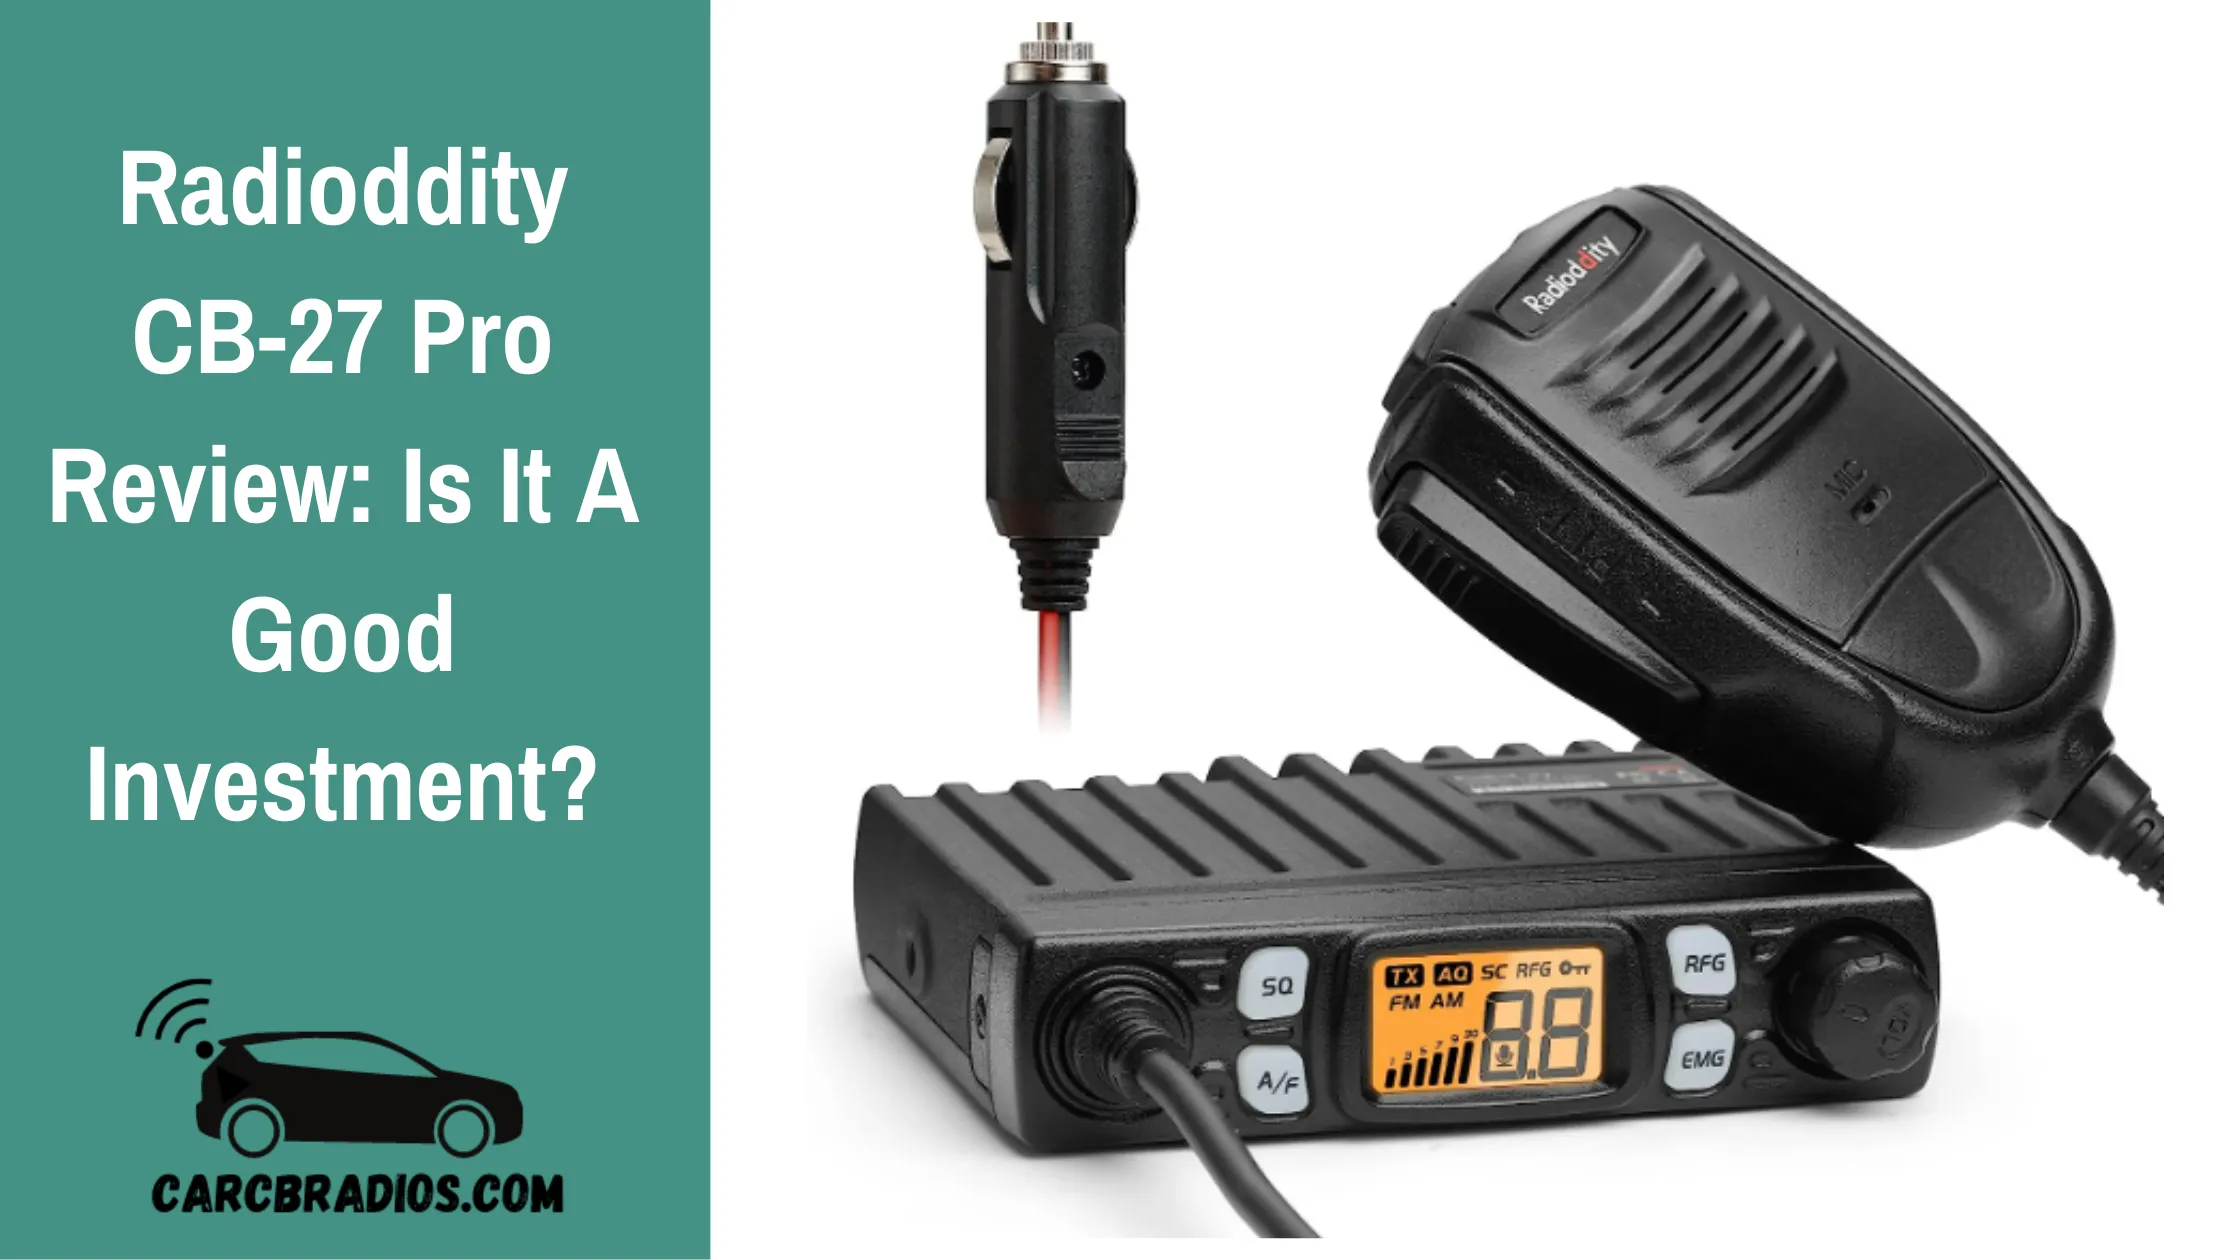 Overall, the Radioddity CB-27 Pro is a great choice for anyone in need of a compact CB radio that's easy to use and perfect for beginners. With its impressive range and features, it's definitely worth considering.